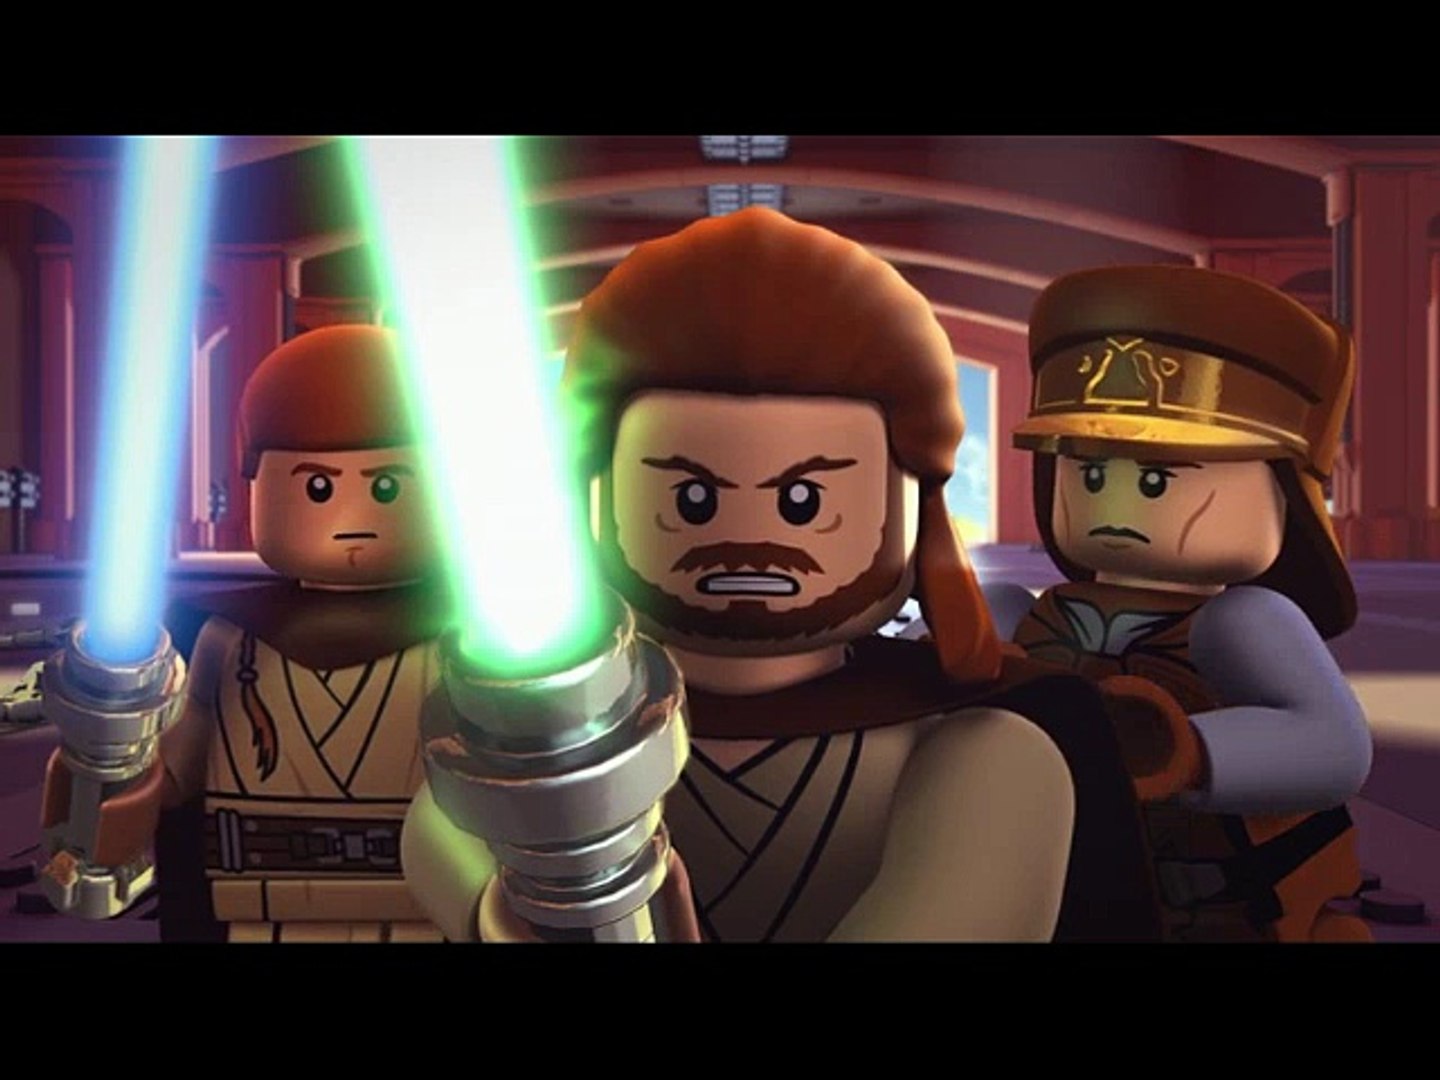 Lego Star Wars Droid - Episode I climax (without music) - video Dailymotion